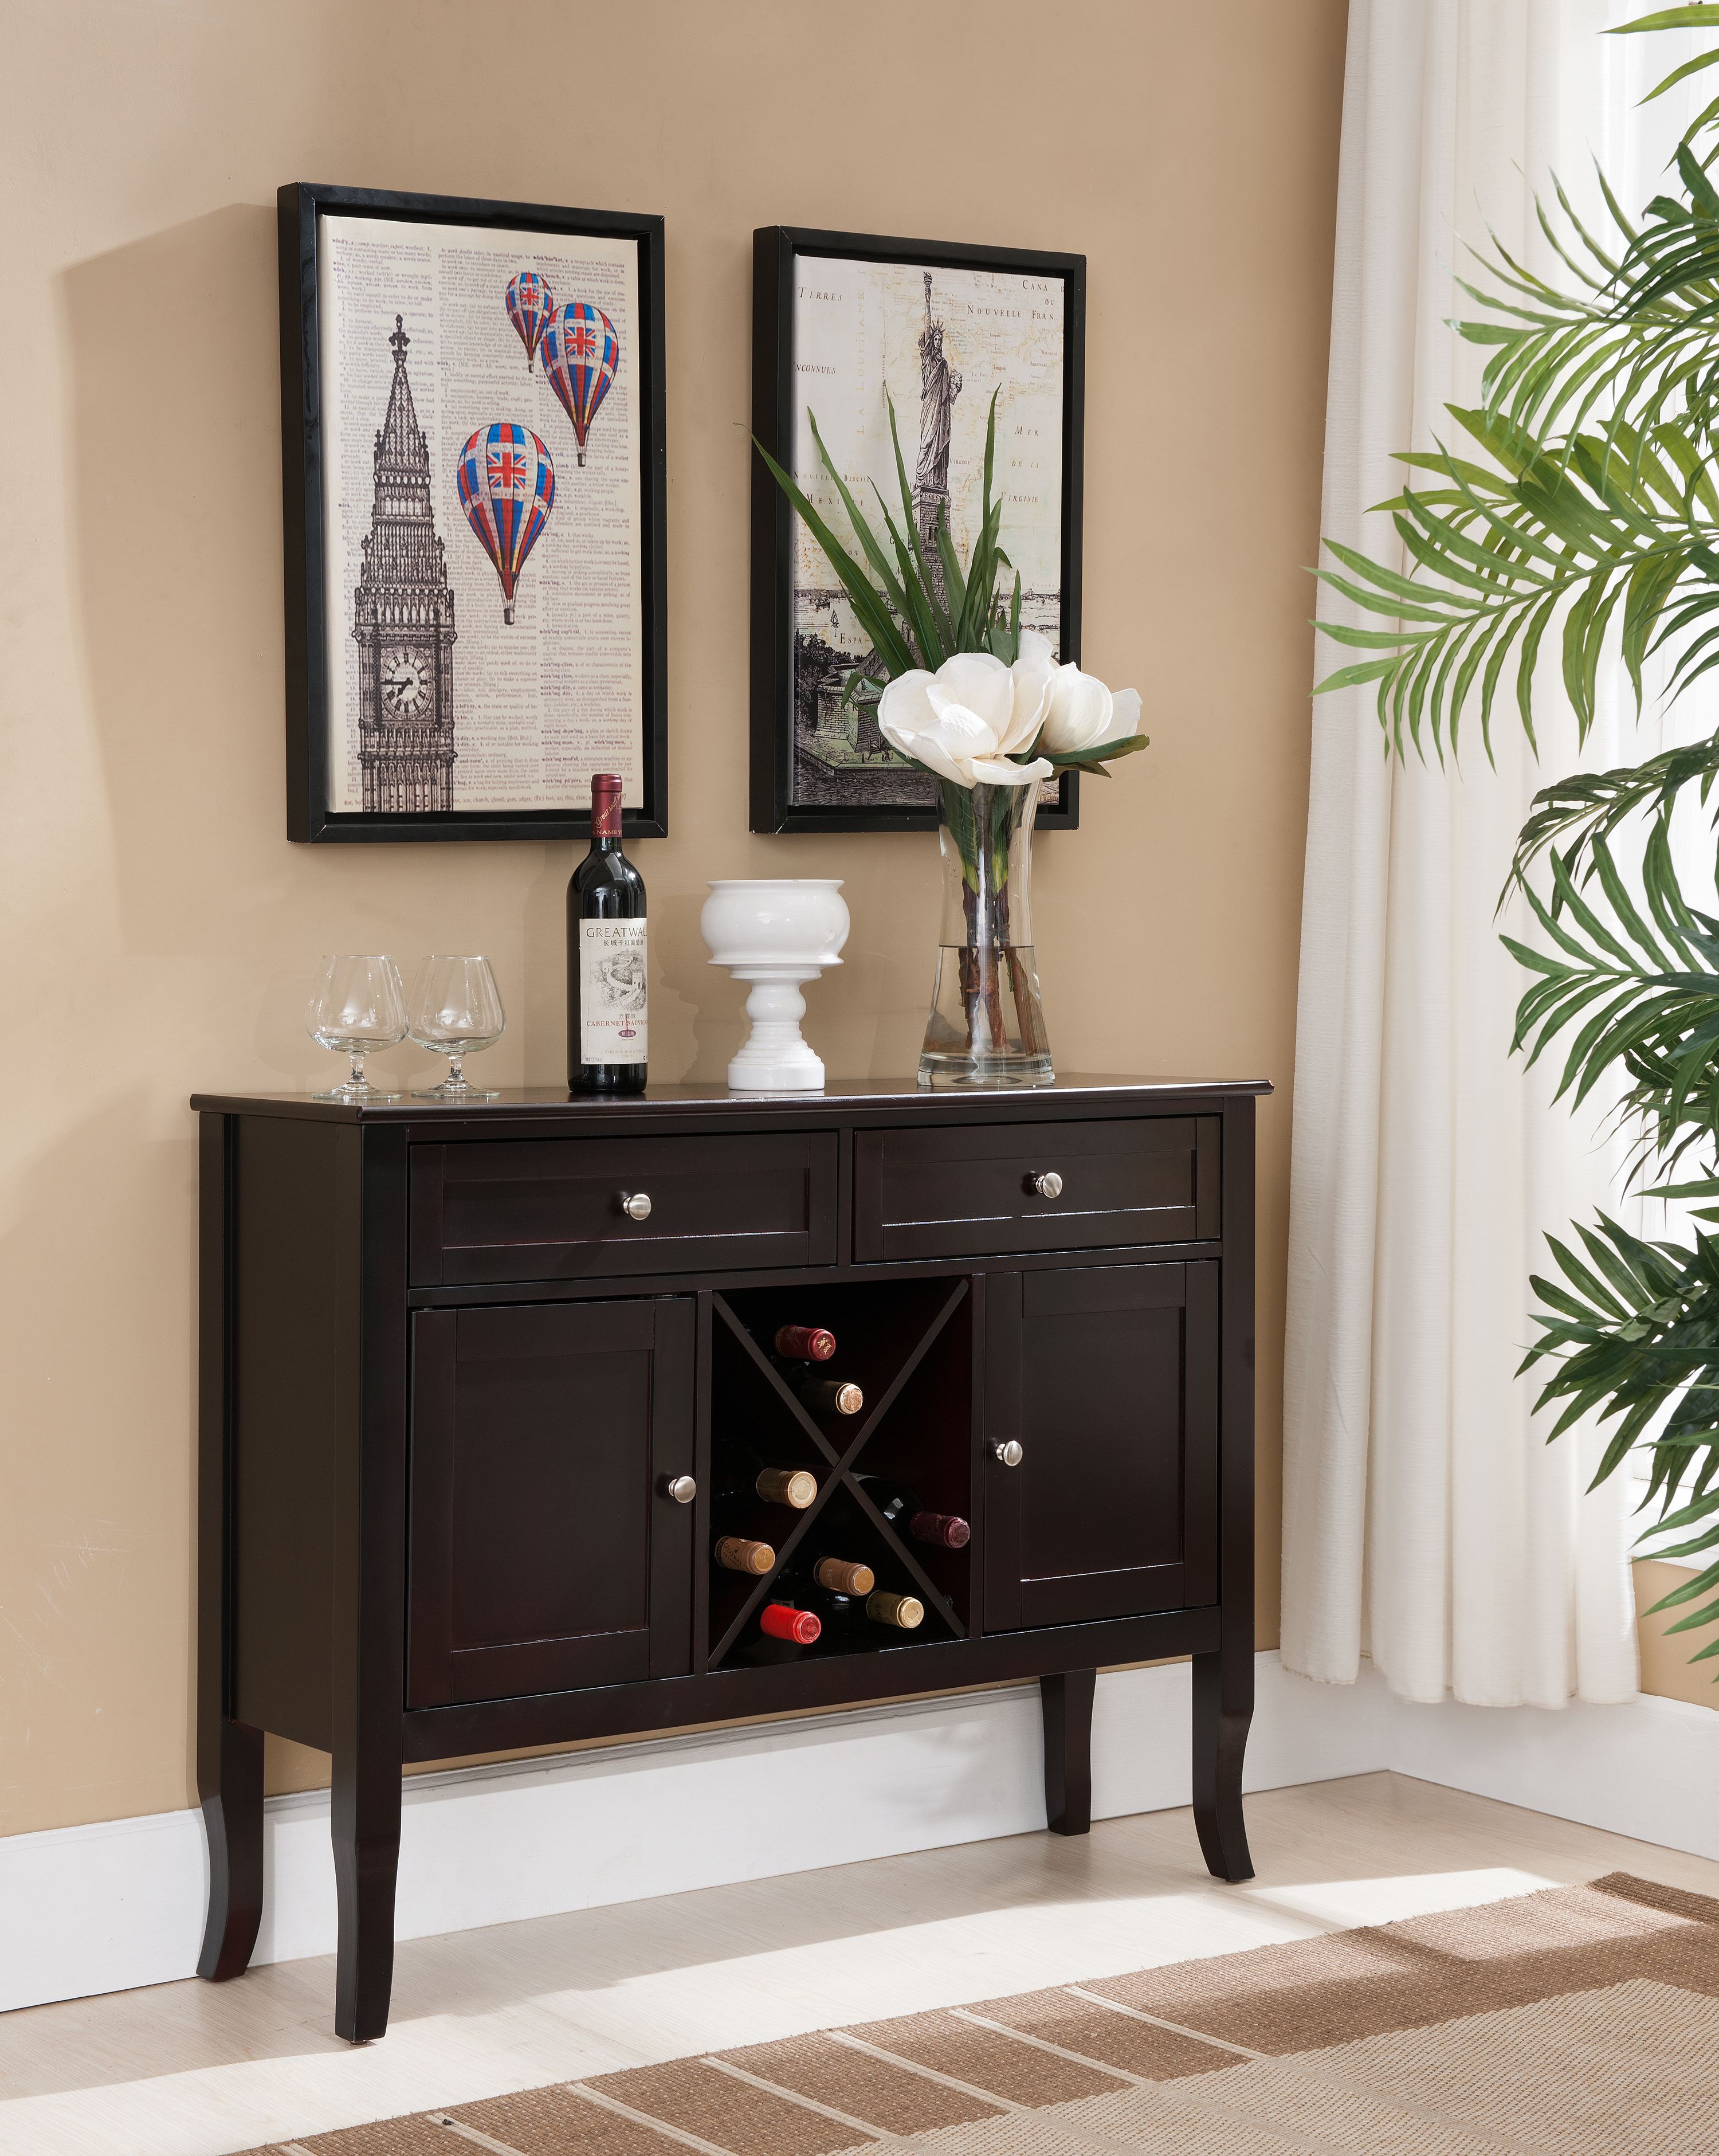 Eric Dark Cherry Wood Contemporary Wine Rack Buffet Display Console Table  With Storage Drawers & Cabinet Doors – Walmart In Buffets With Cherry Finish (View 18 of 20)